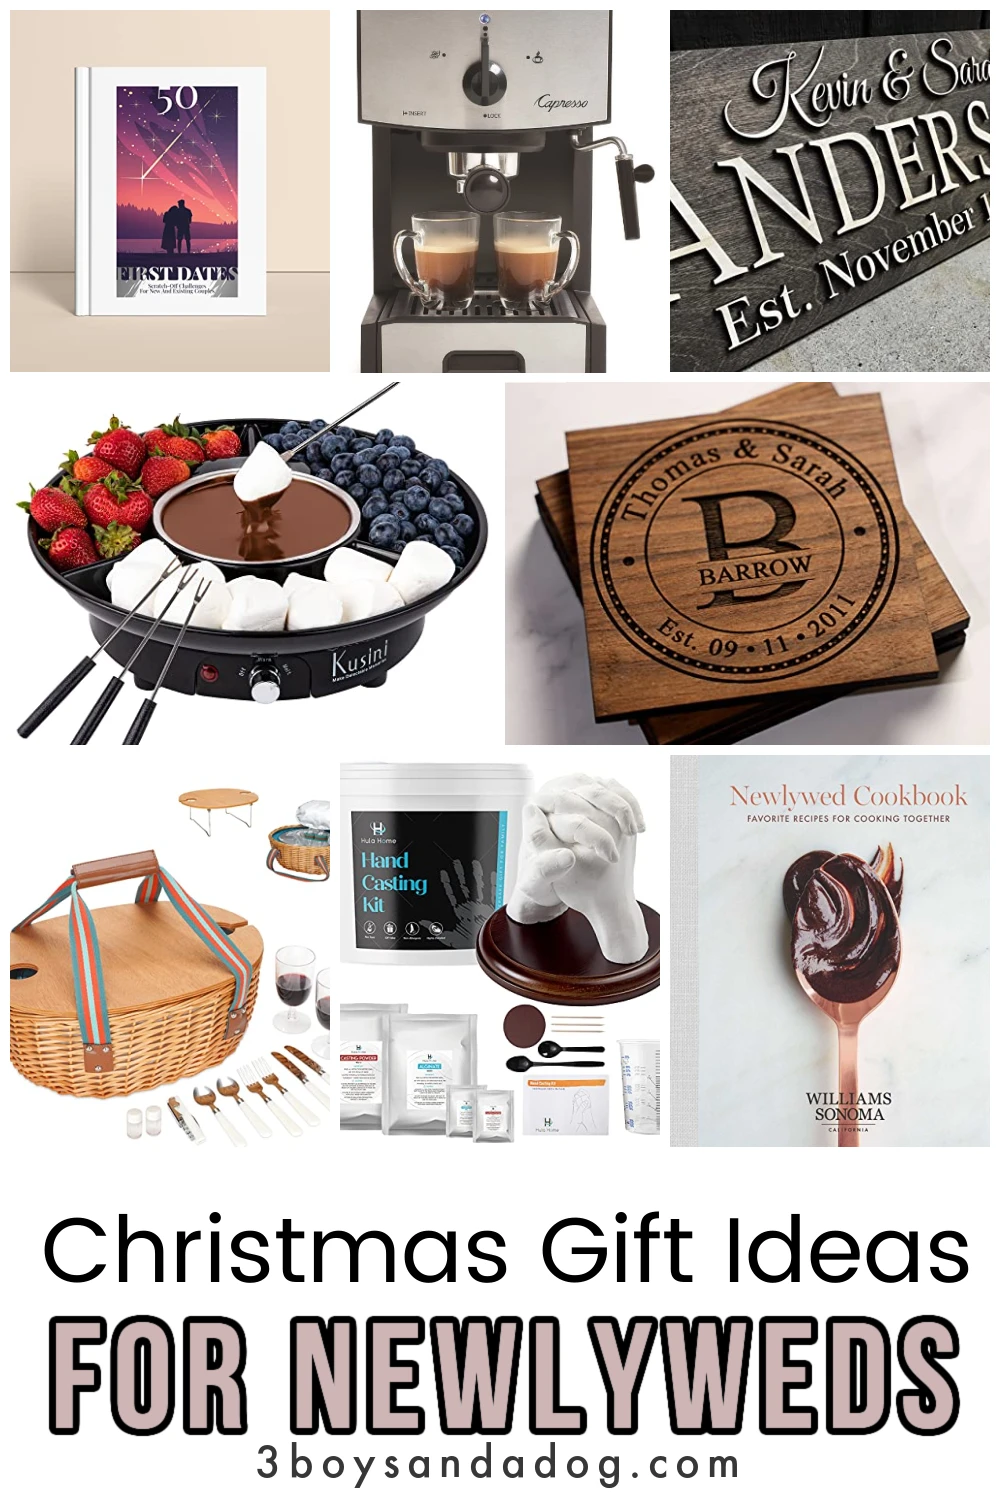 15 Christmas Gift Ideas for Newlyweds - 3 Boys and a Dog